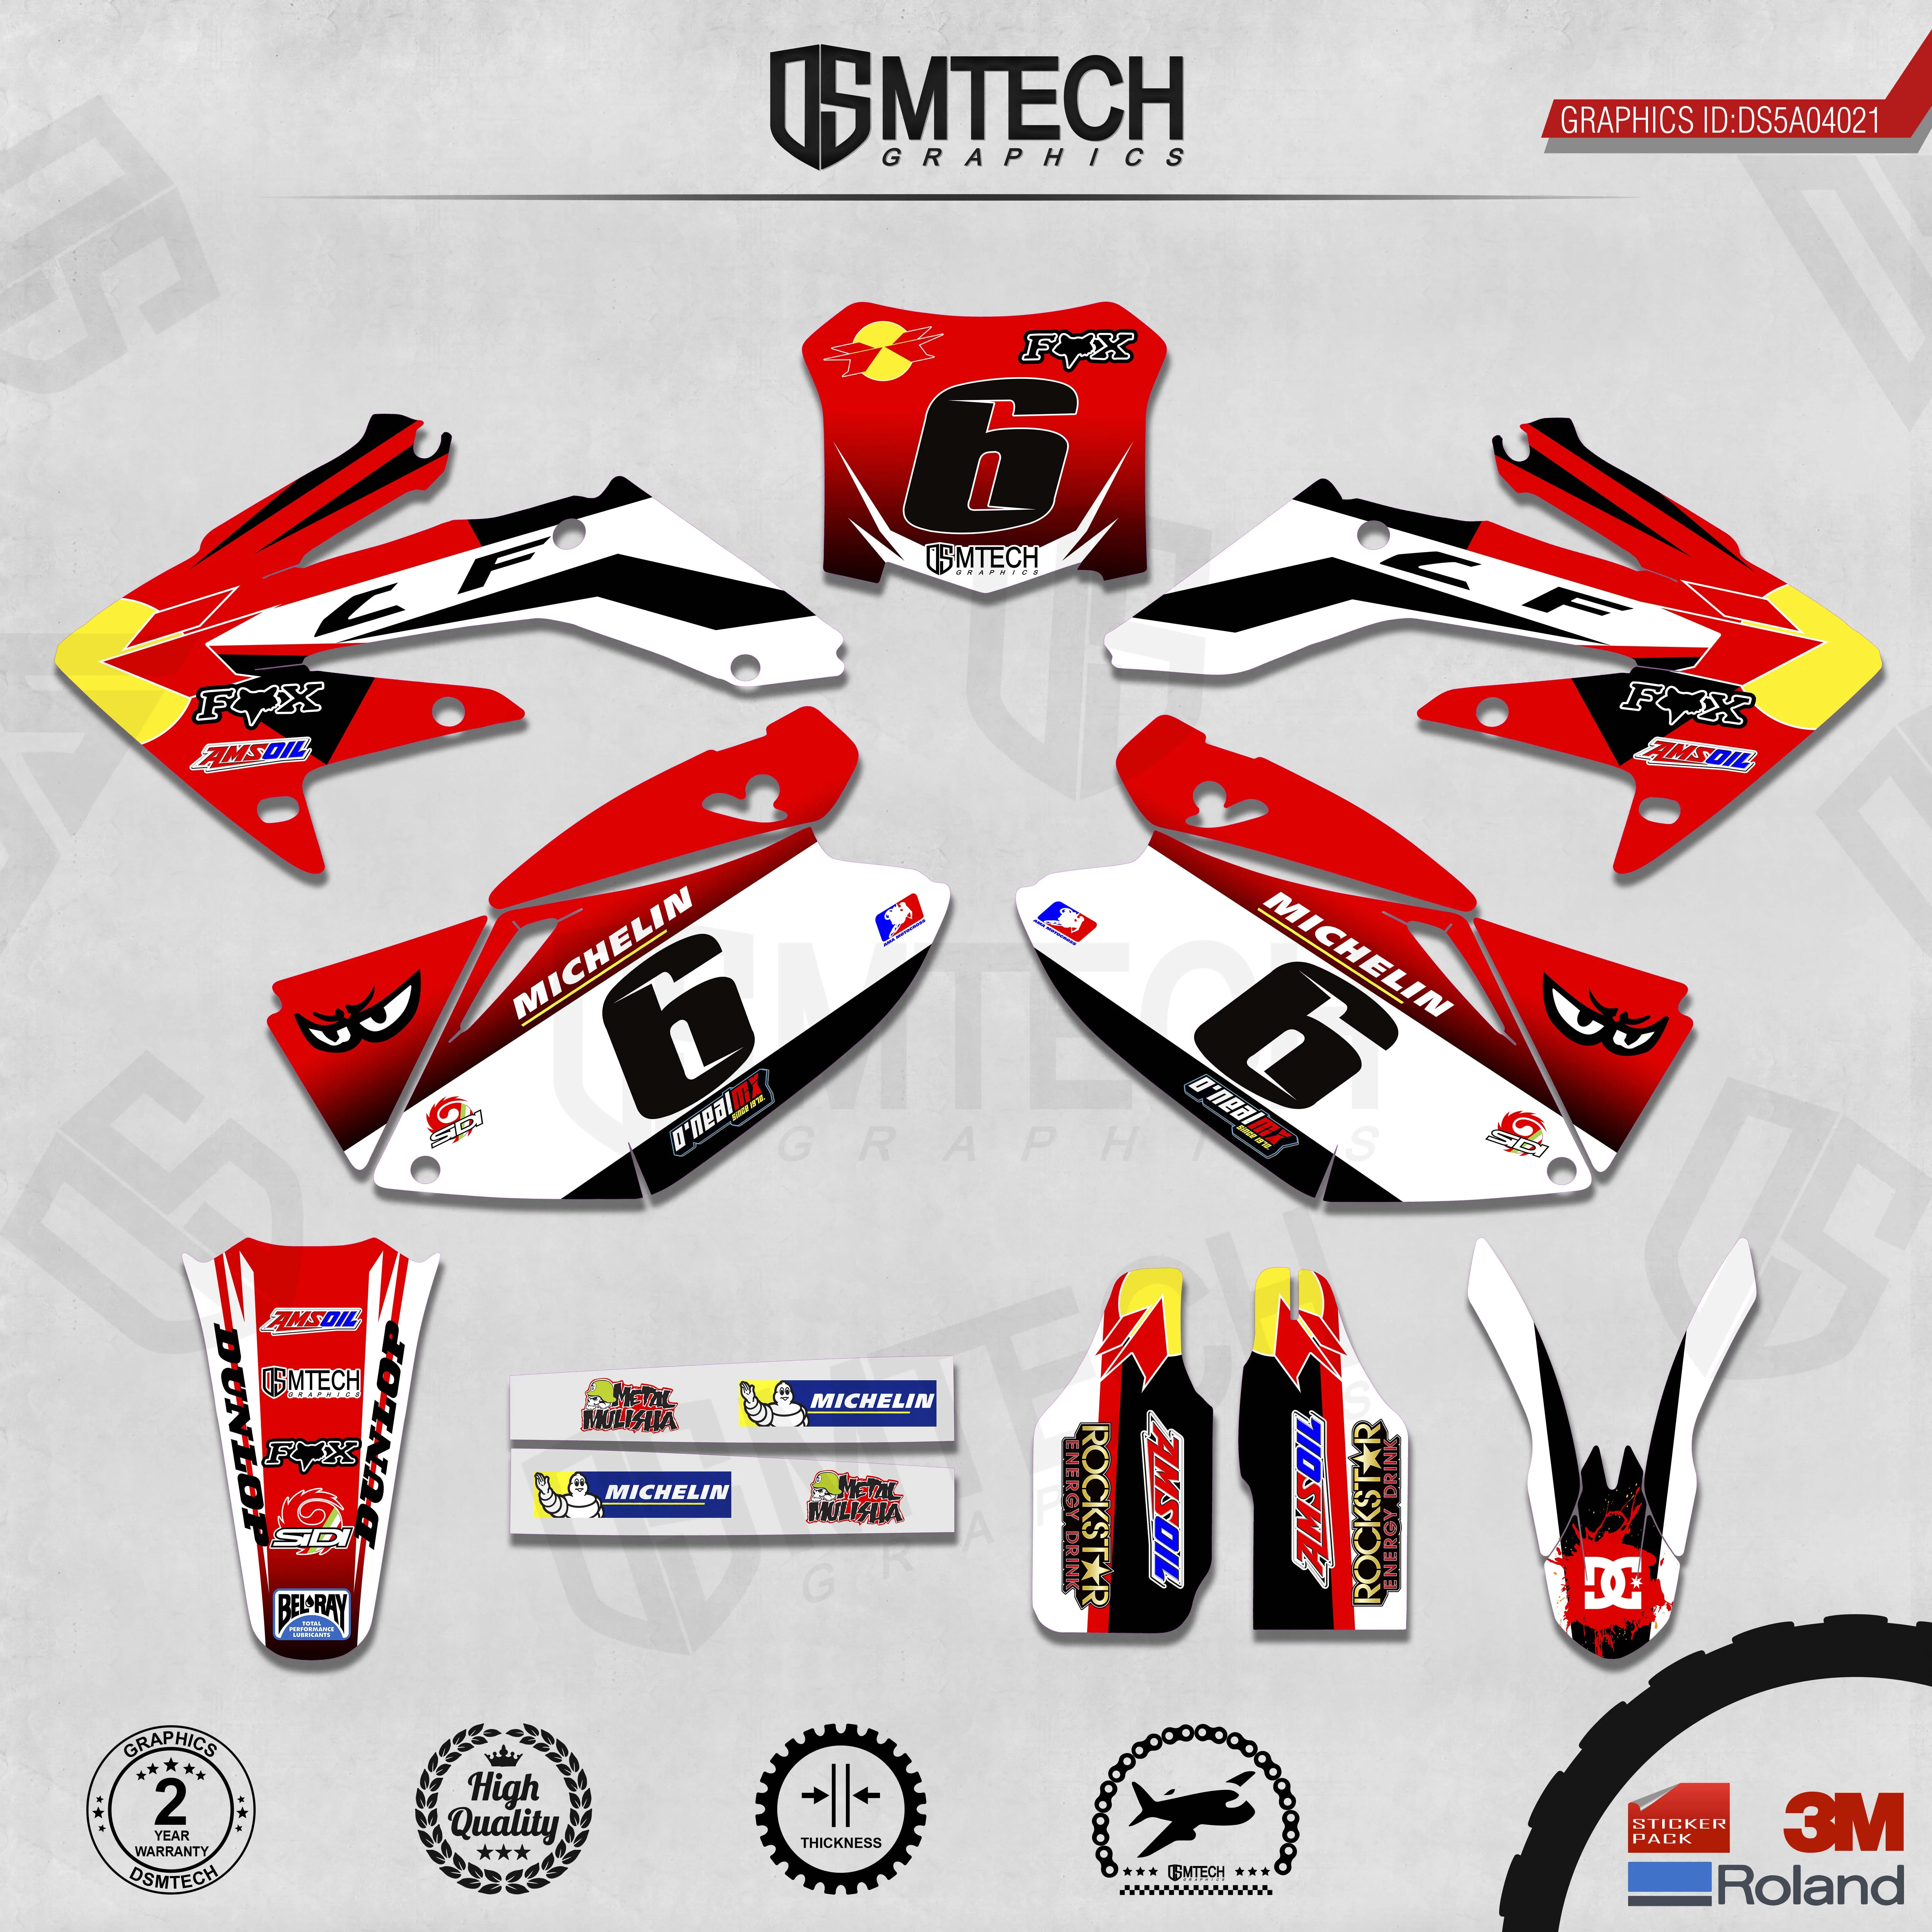 DSMTECH Customized Team Graphics Backgrounds Decals 3M Custom Stickers For 2004-2005 2006-2007 2008-2009 CRF250R 021